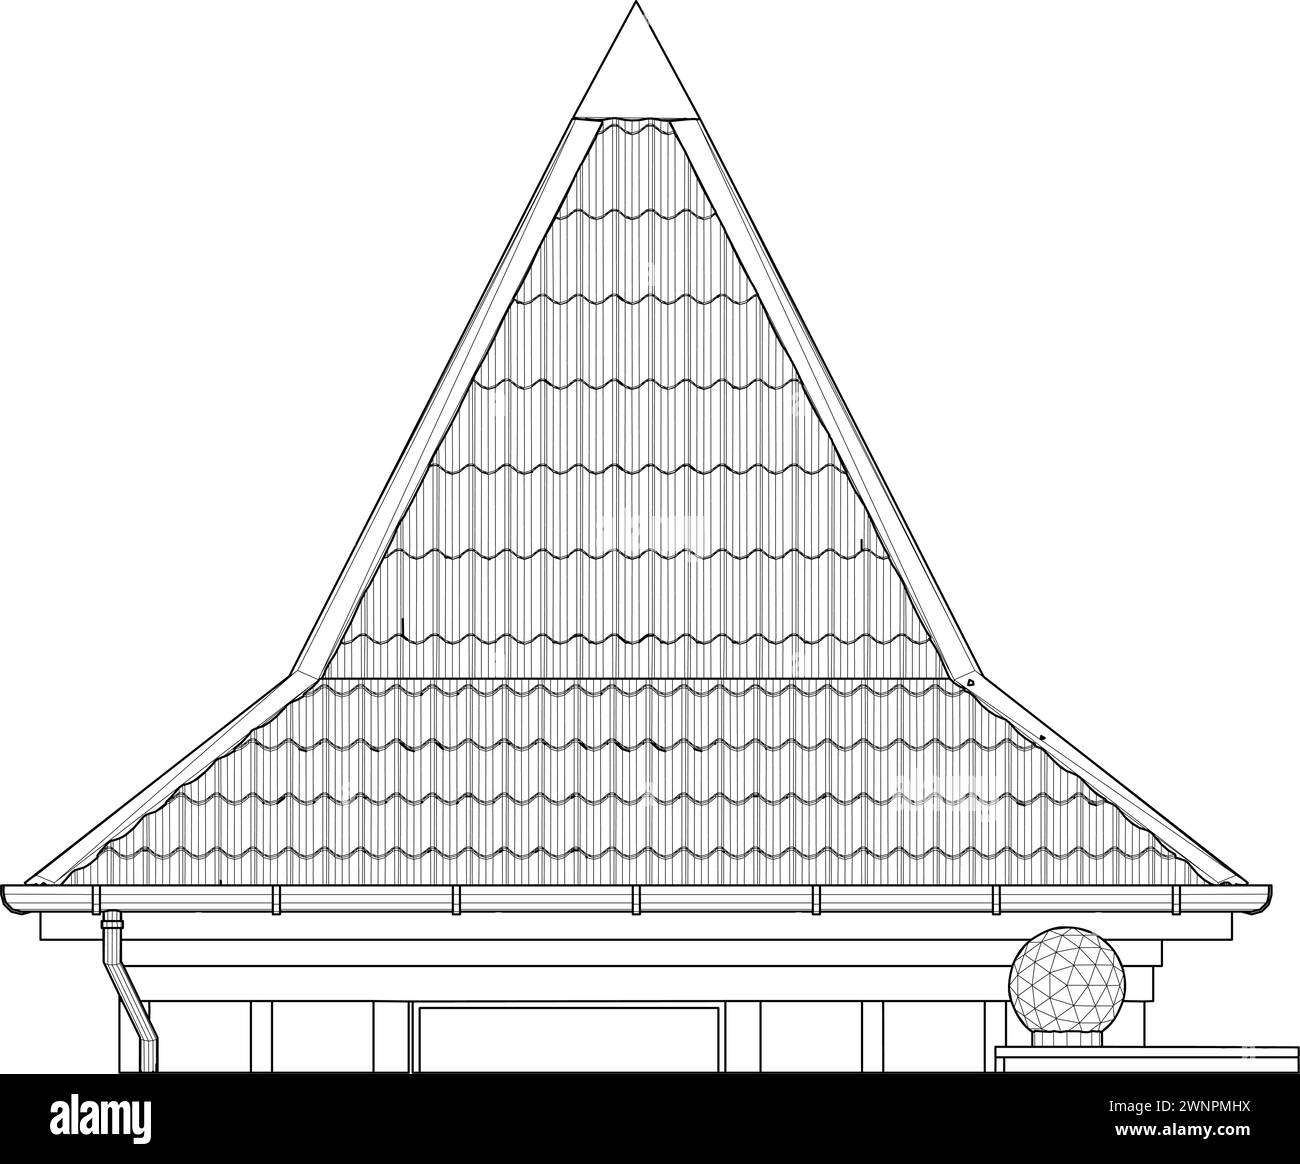 The Roof of the Modern Building Tower Vector. View of the hipped roof. A hip roof, hip-roof, hipped roof. Stock Vector